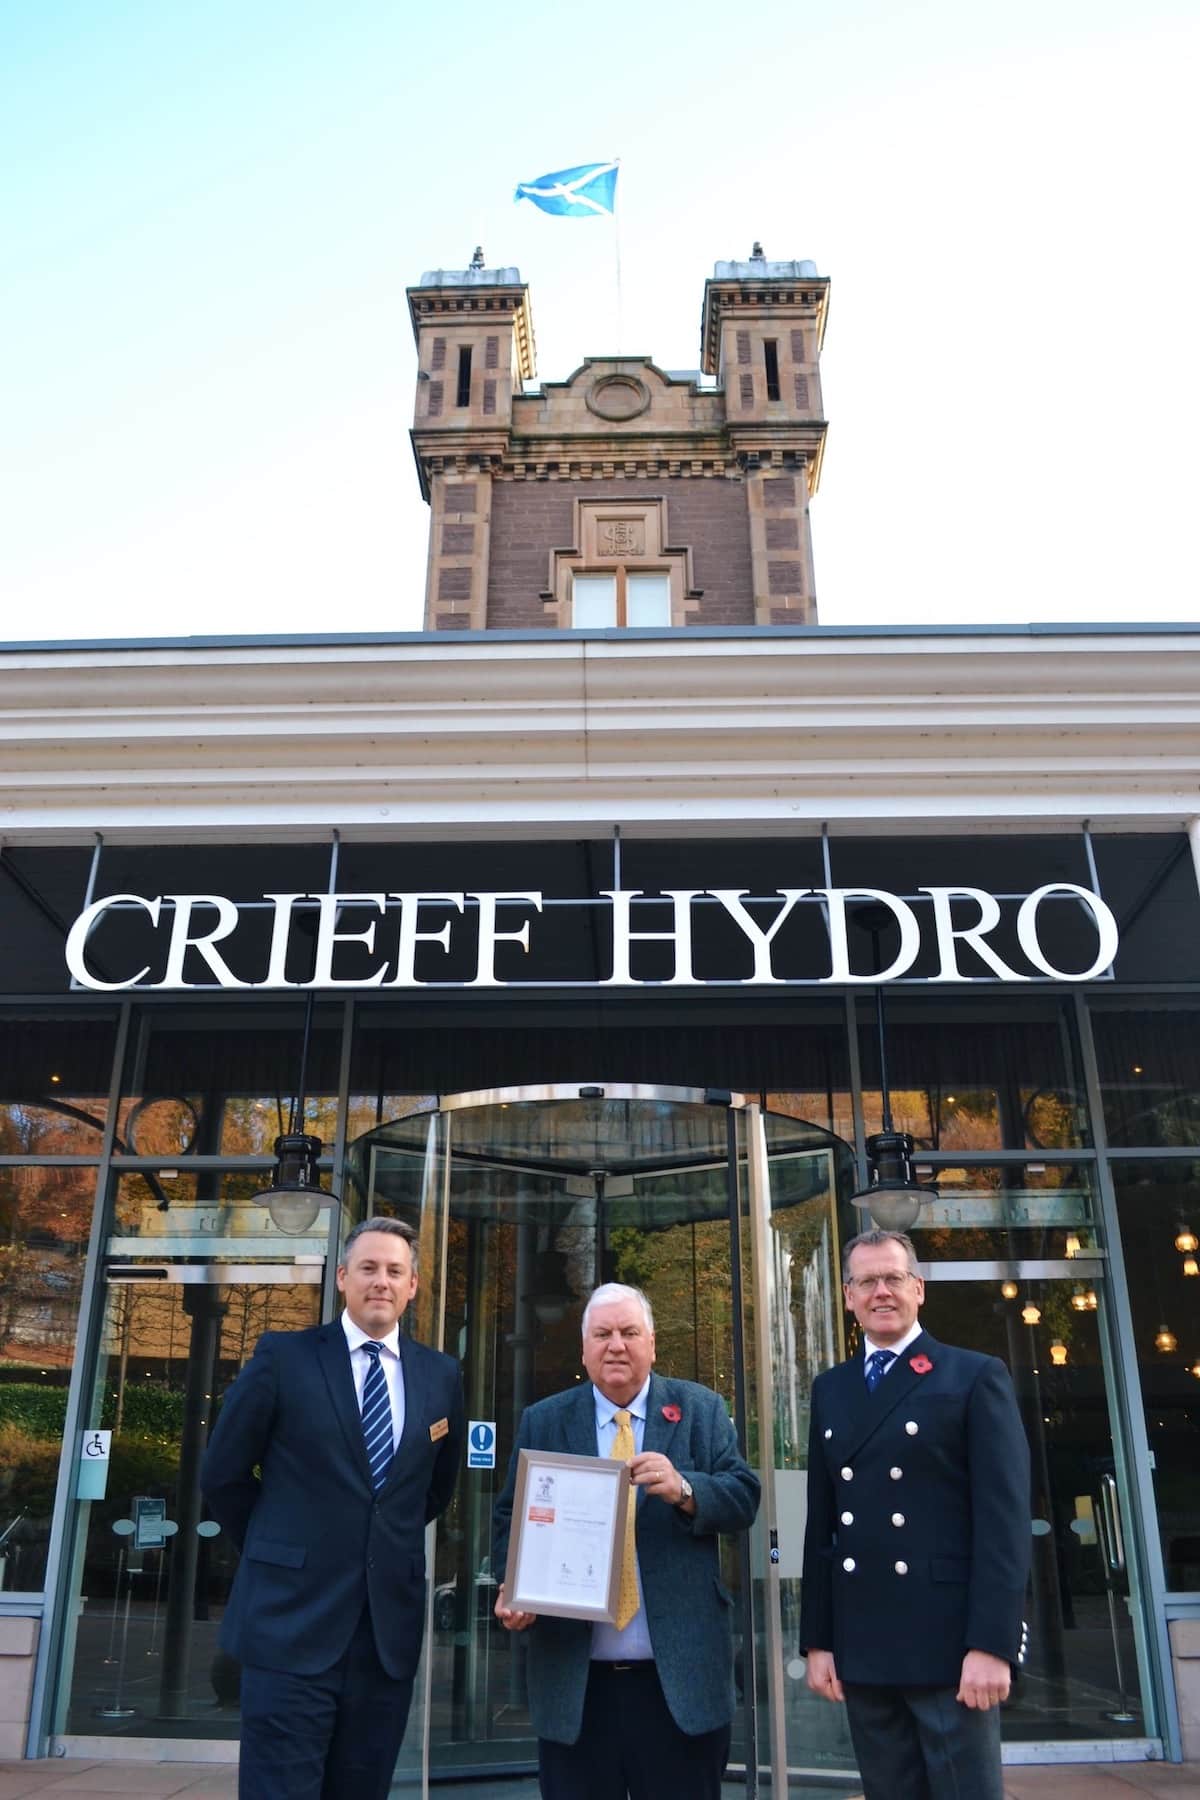 ERS Bronze presented to Crieff Hydro Family of Hotels.